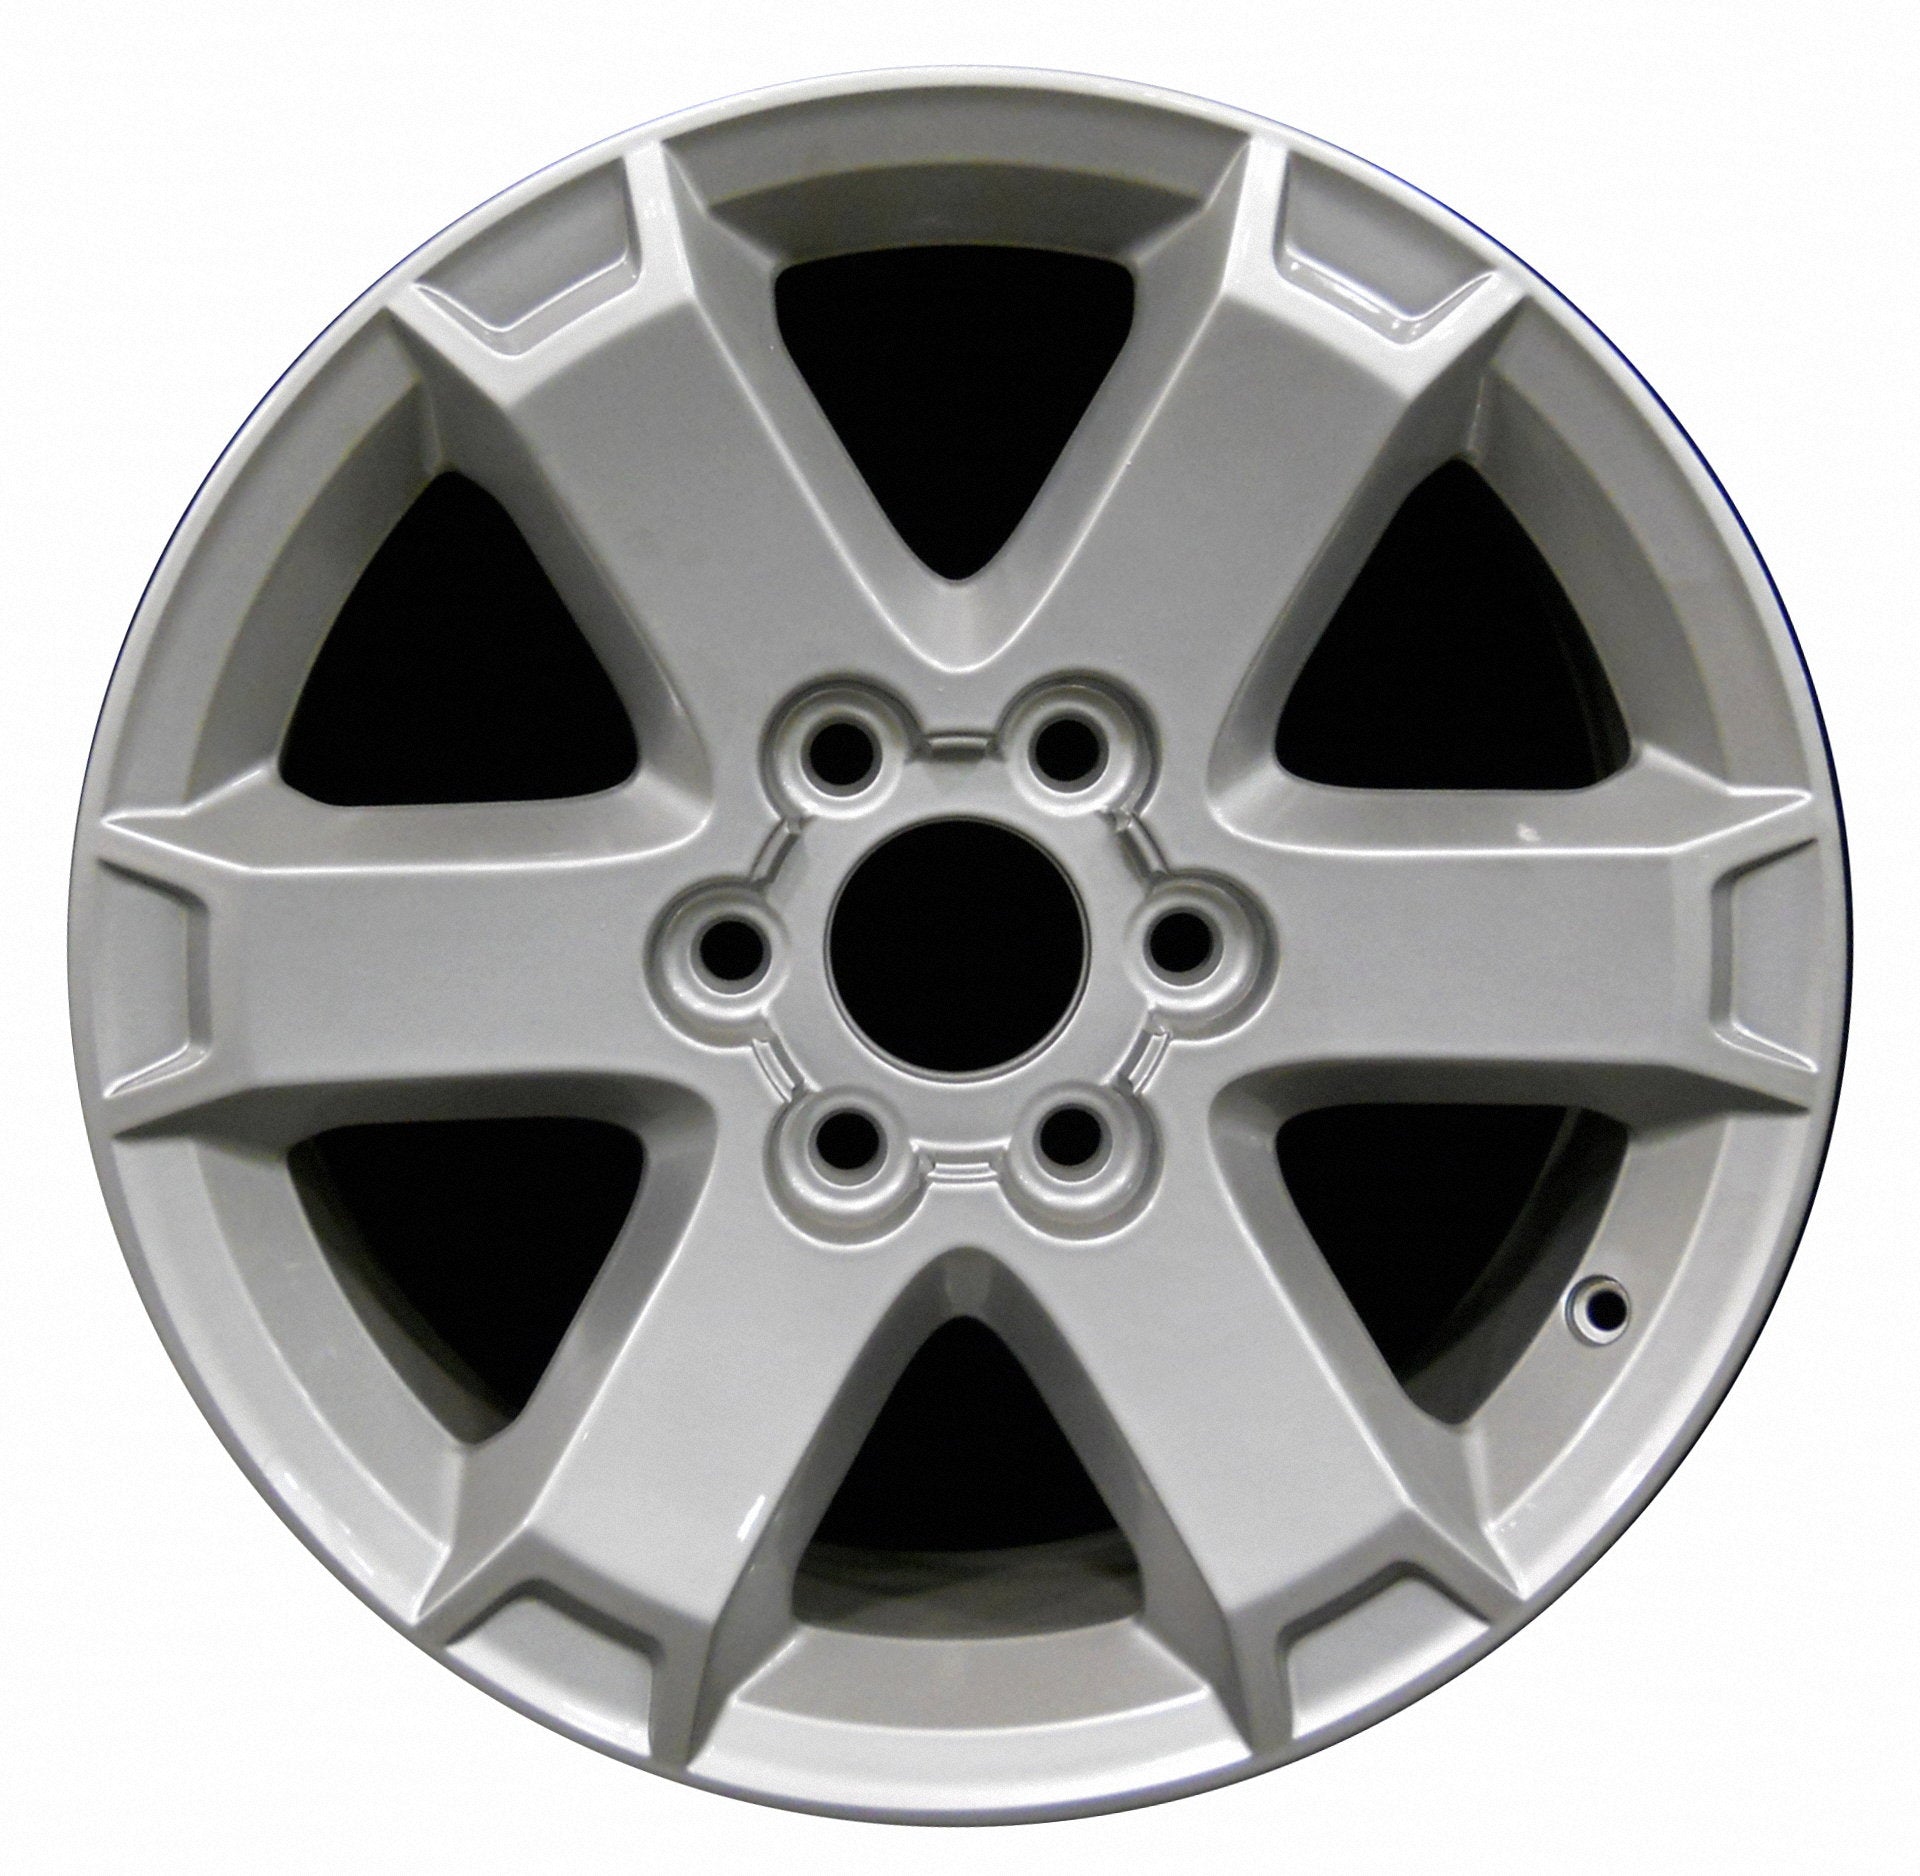 Saturn Outlook  2007, 2008, 2009, 2010 Factory OEM Car Wheel Size 18x7.5 Alloy WAO.7052.LS16.FF